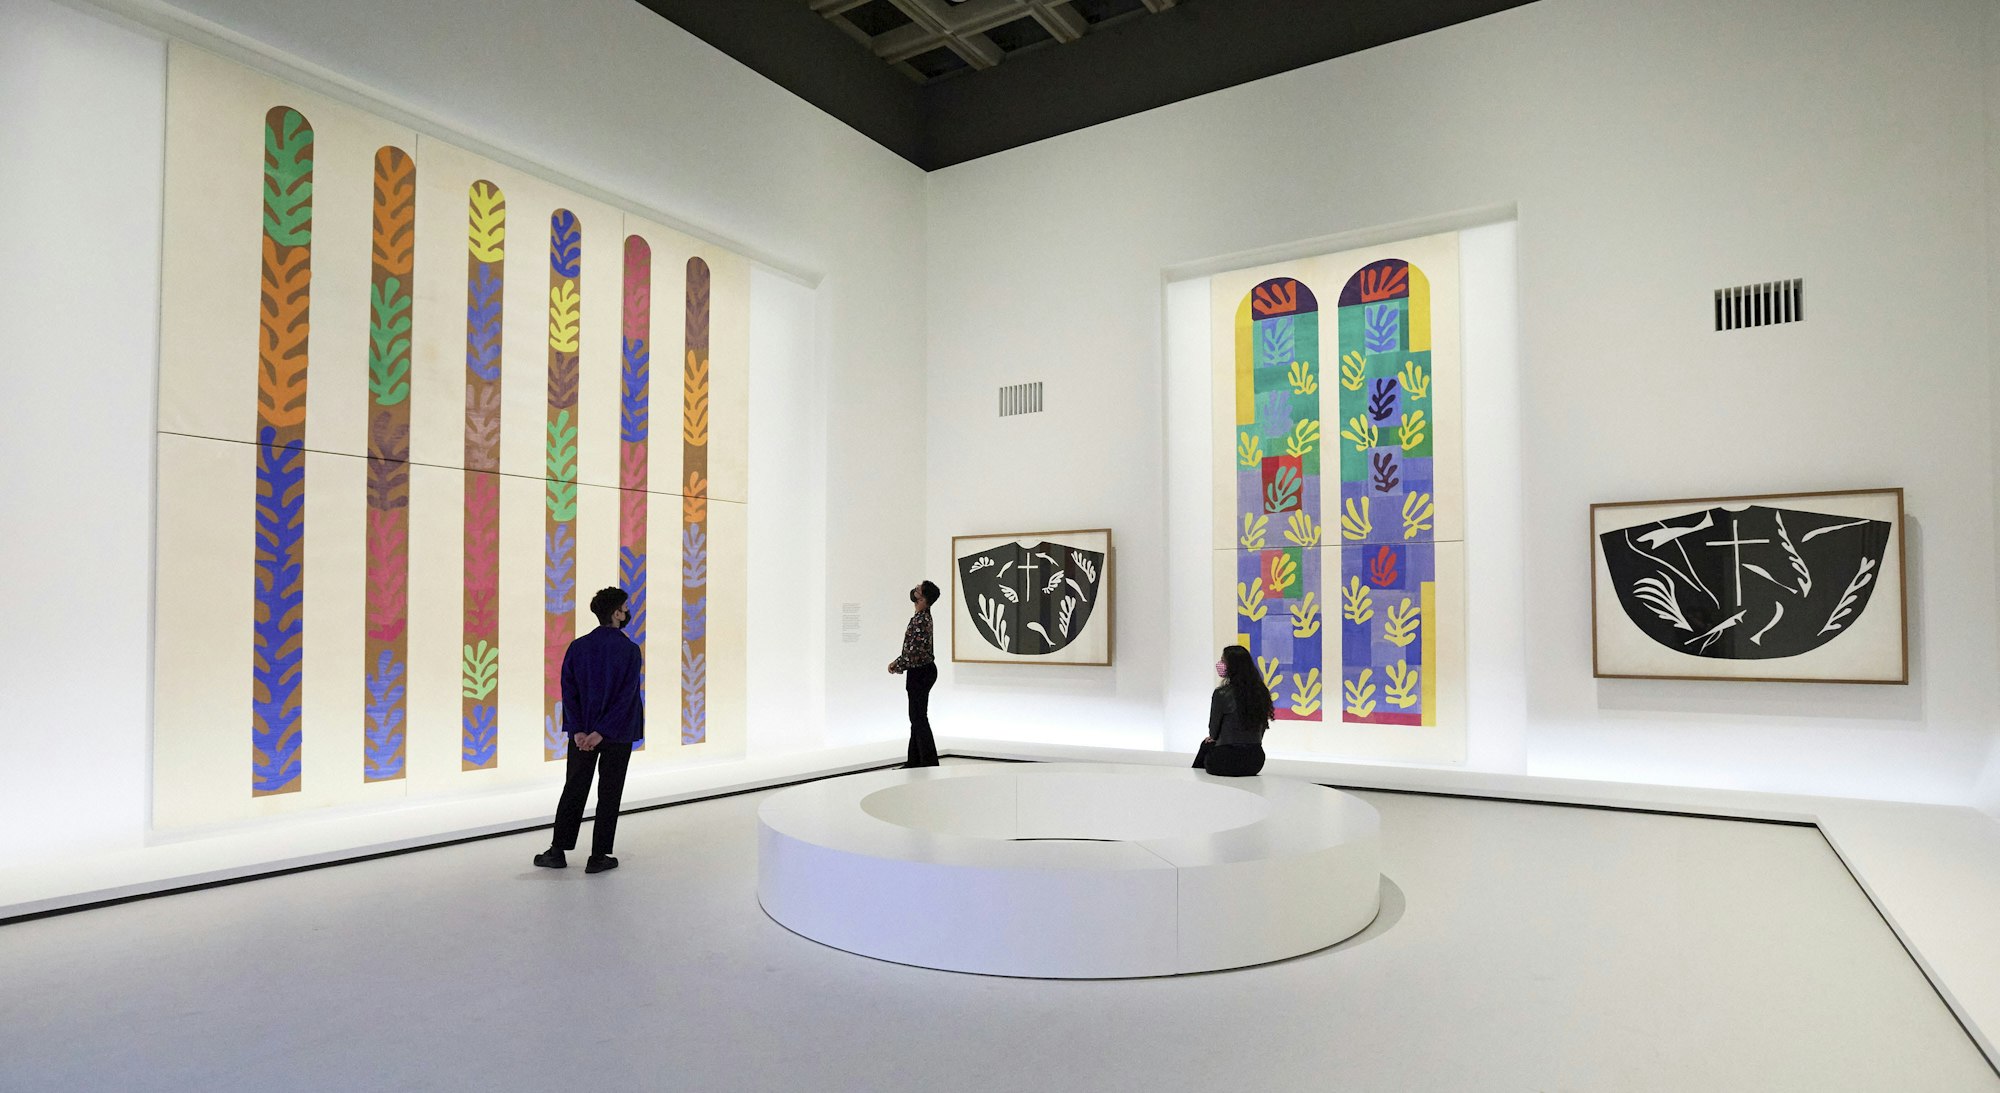 Exhibition installation view of Matisse: Life & Spirit Masterpieces from the Centre Pompidou, Paris exhibition on display at the Art Gallery of New South Wales.